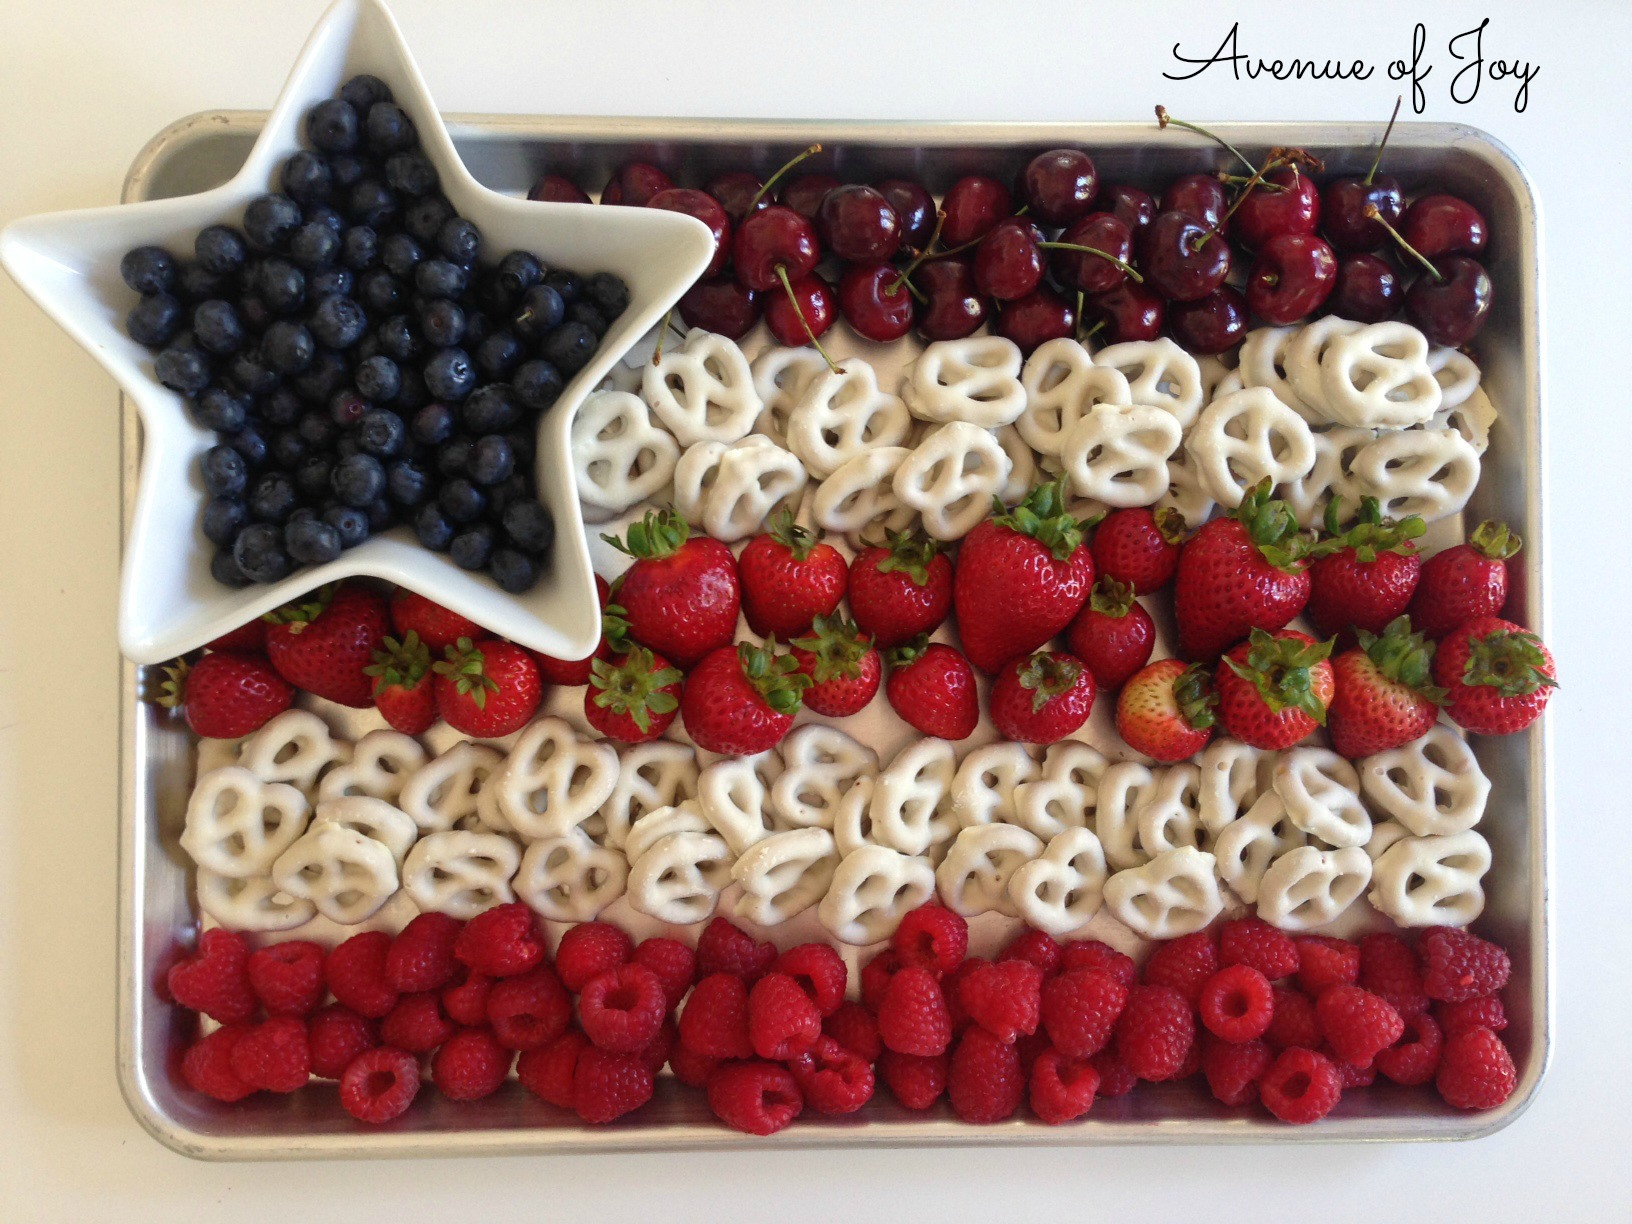 Block Party Food Ideas
 Memorial Day Block Party Fruit Flag And More Fun Food